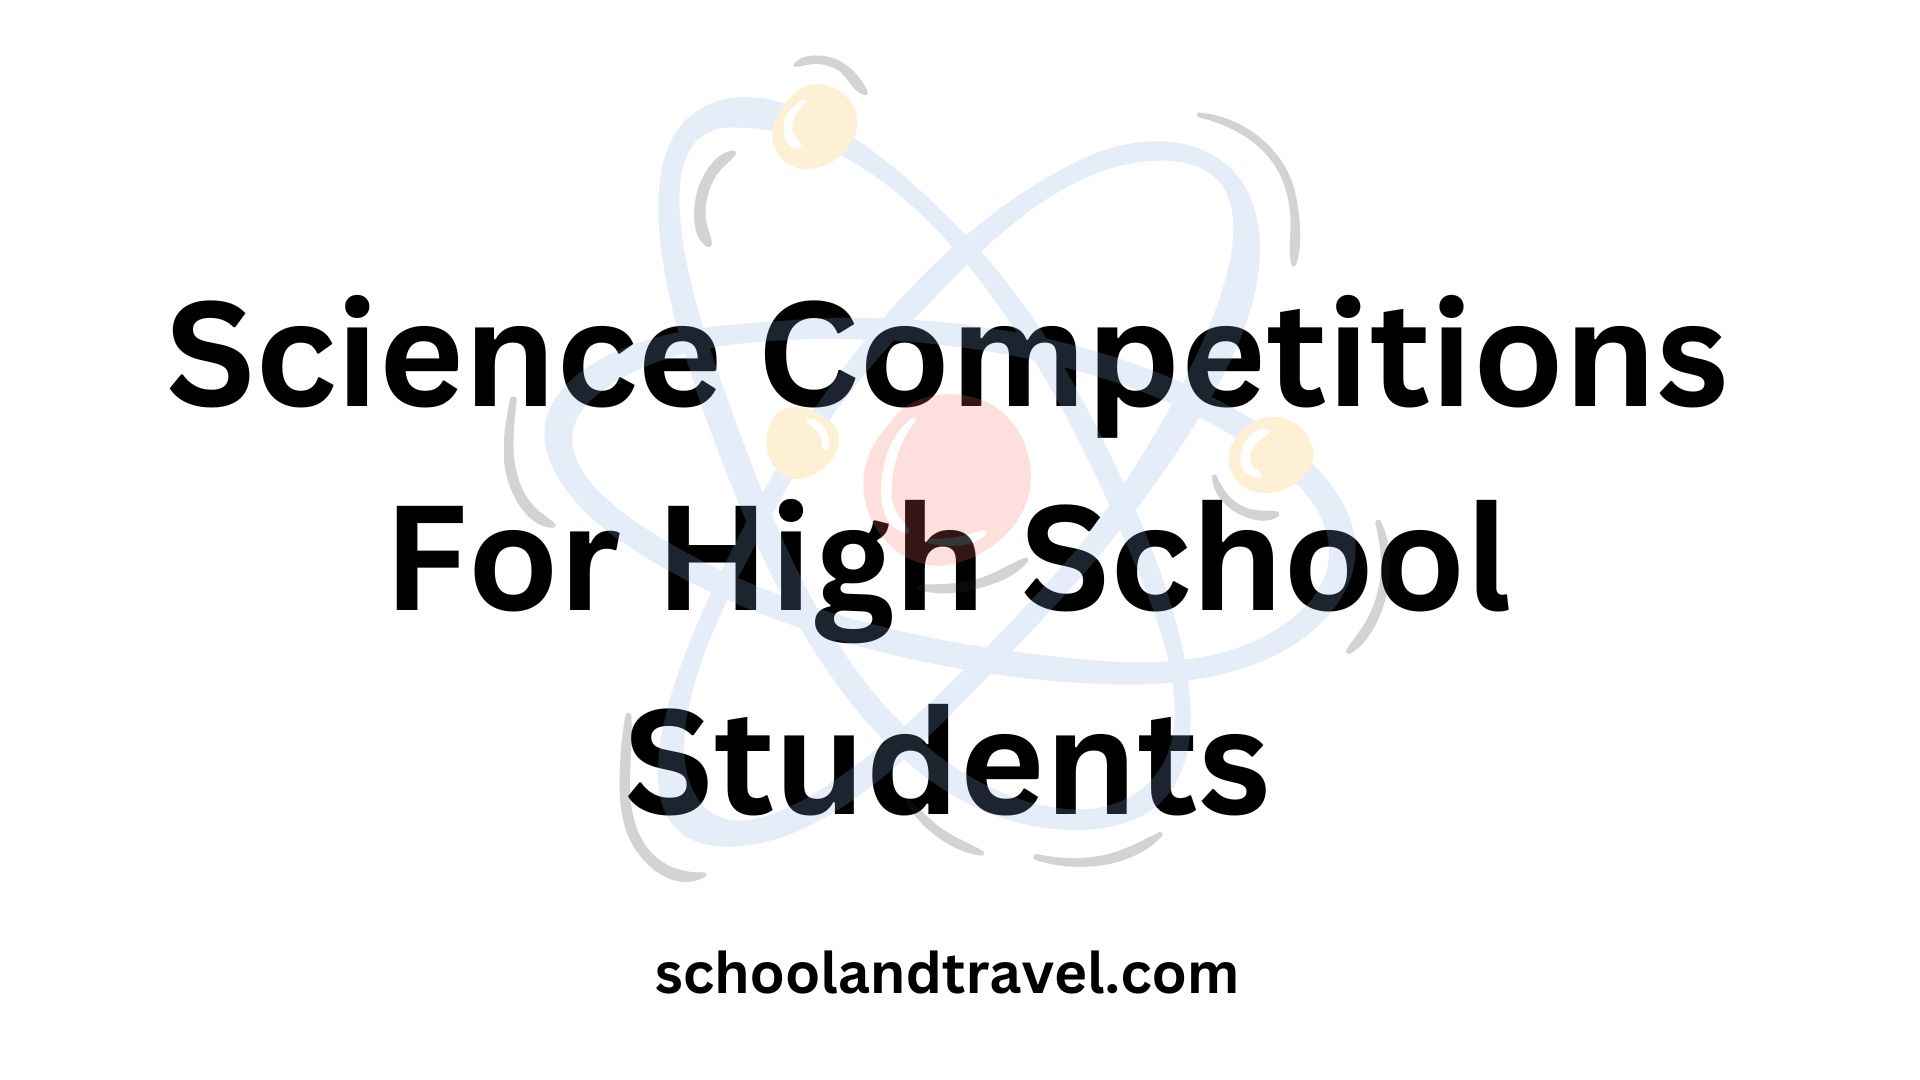 Science Competitions For High School Students